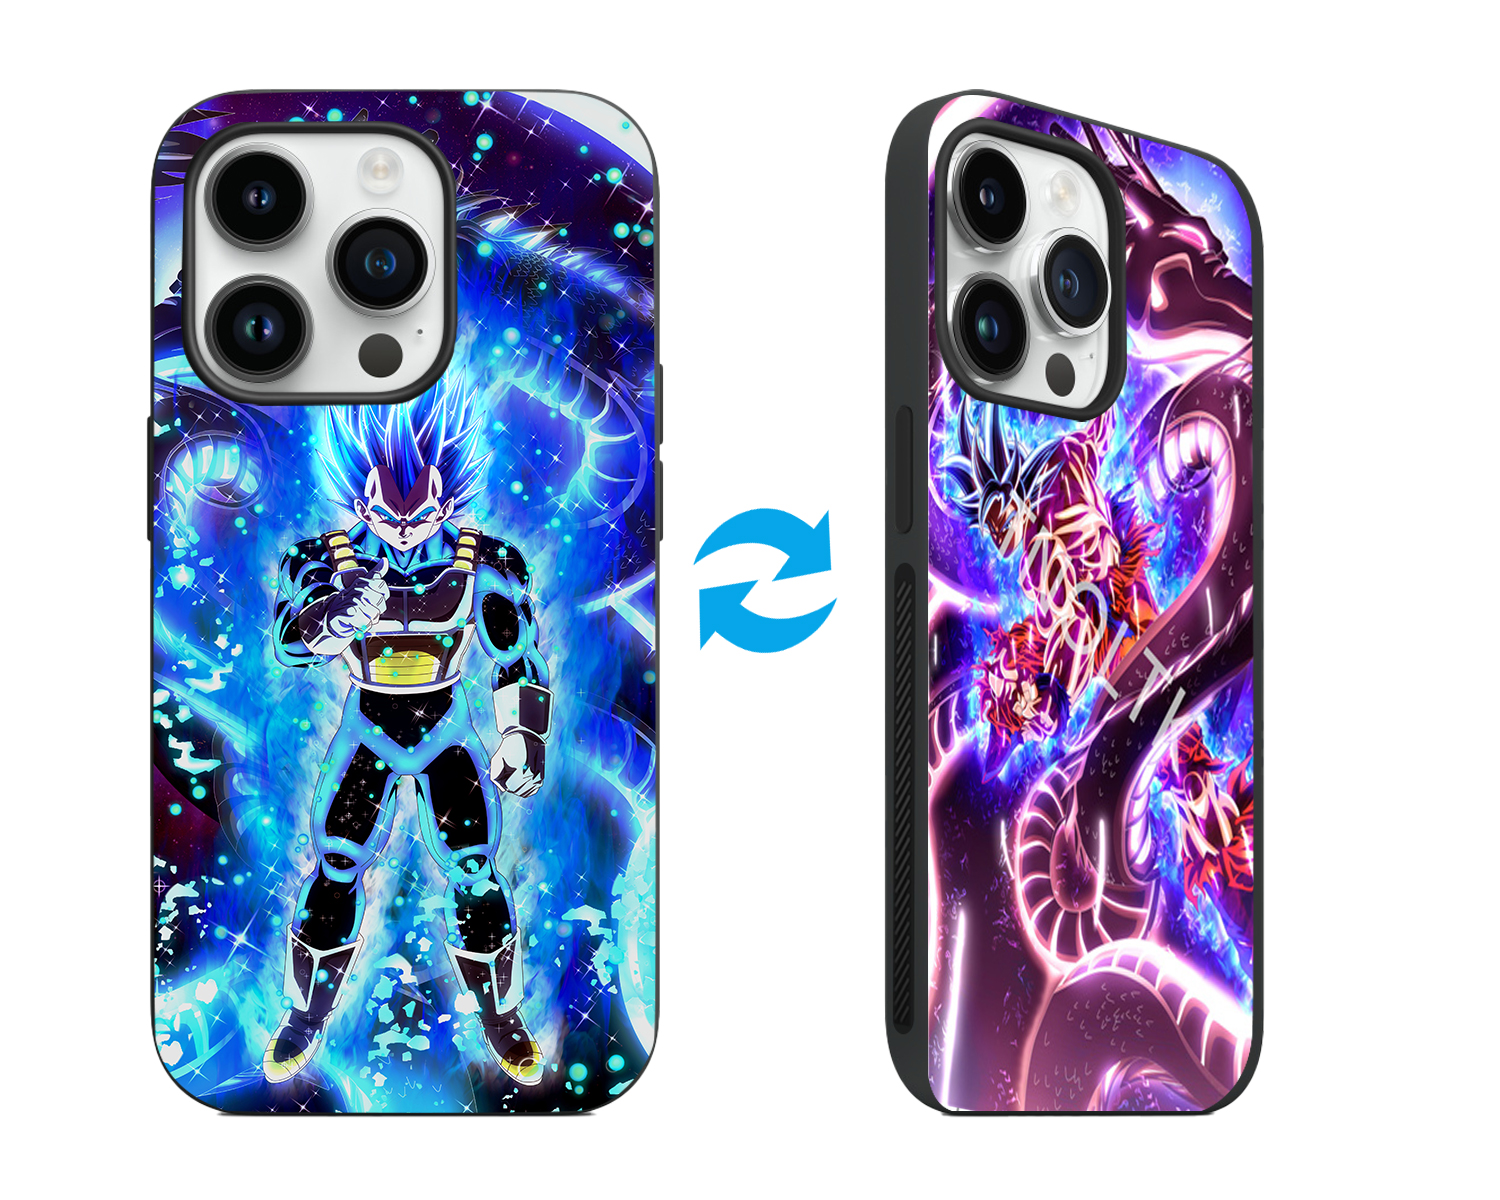 3D Motion iPhone Dragon ball Anime Phone Cases